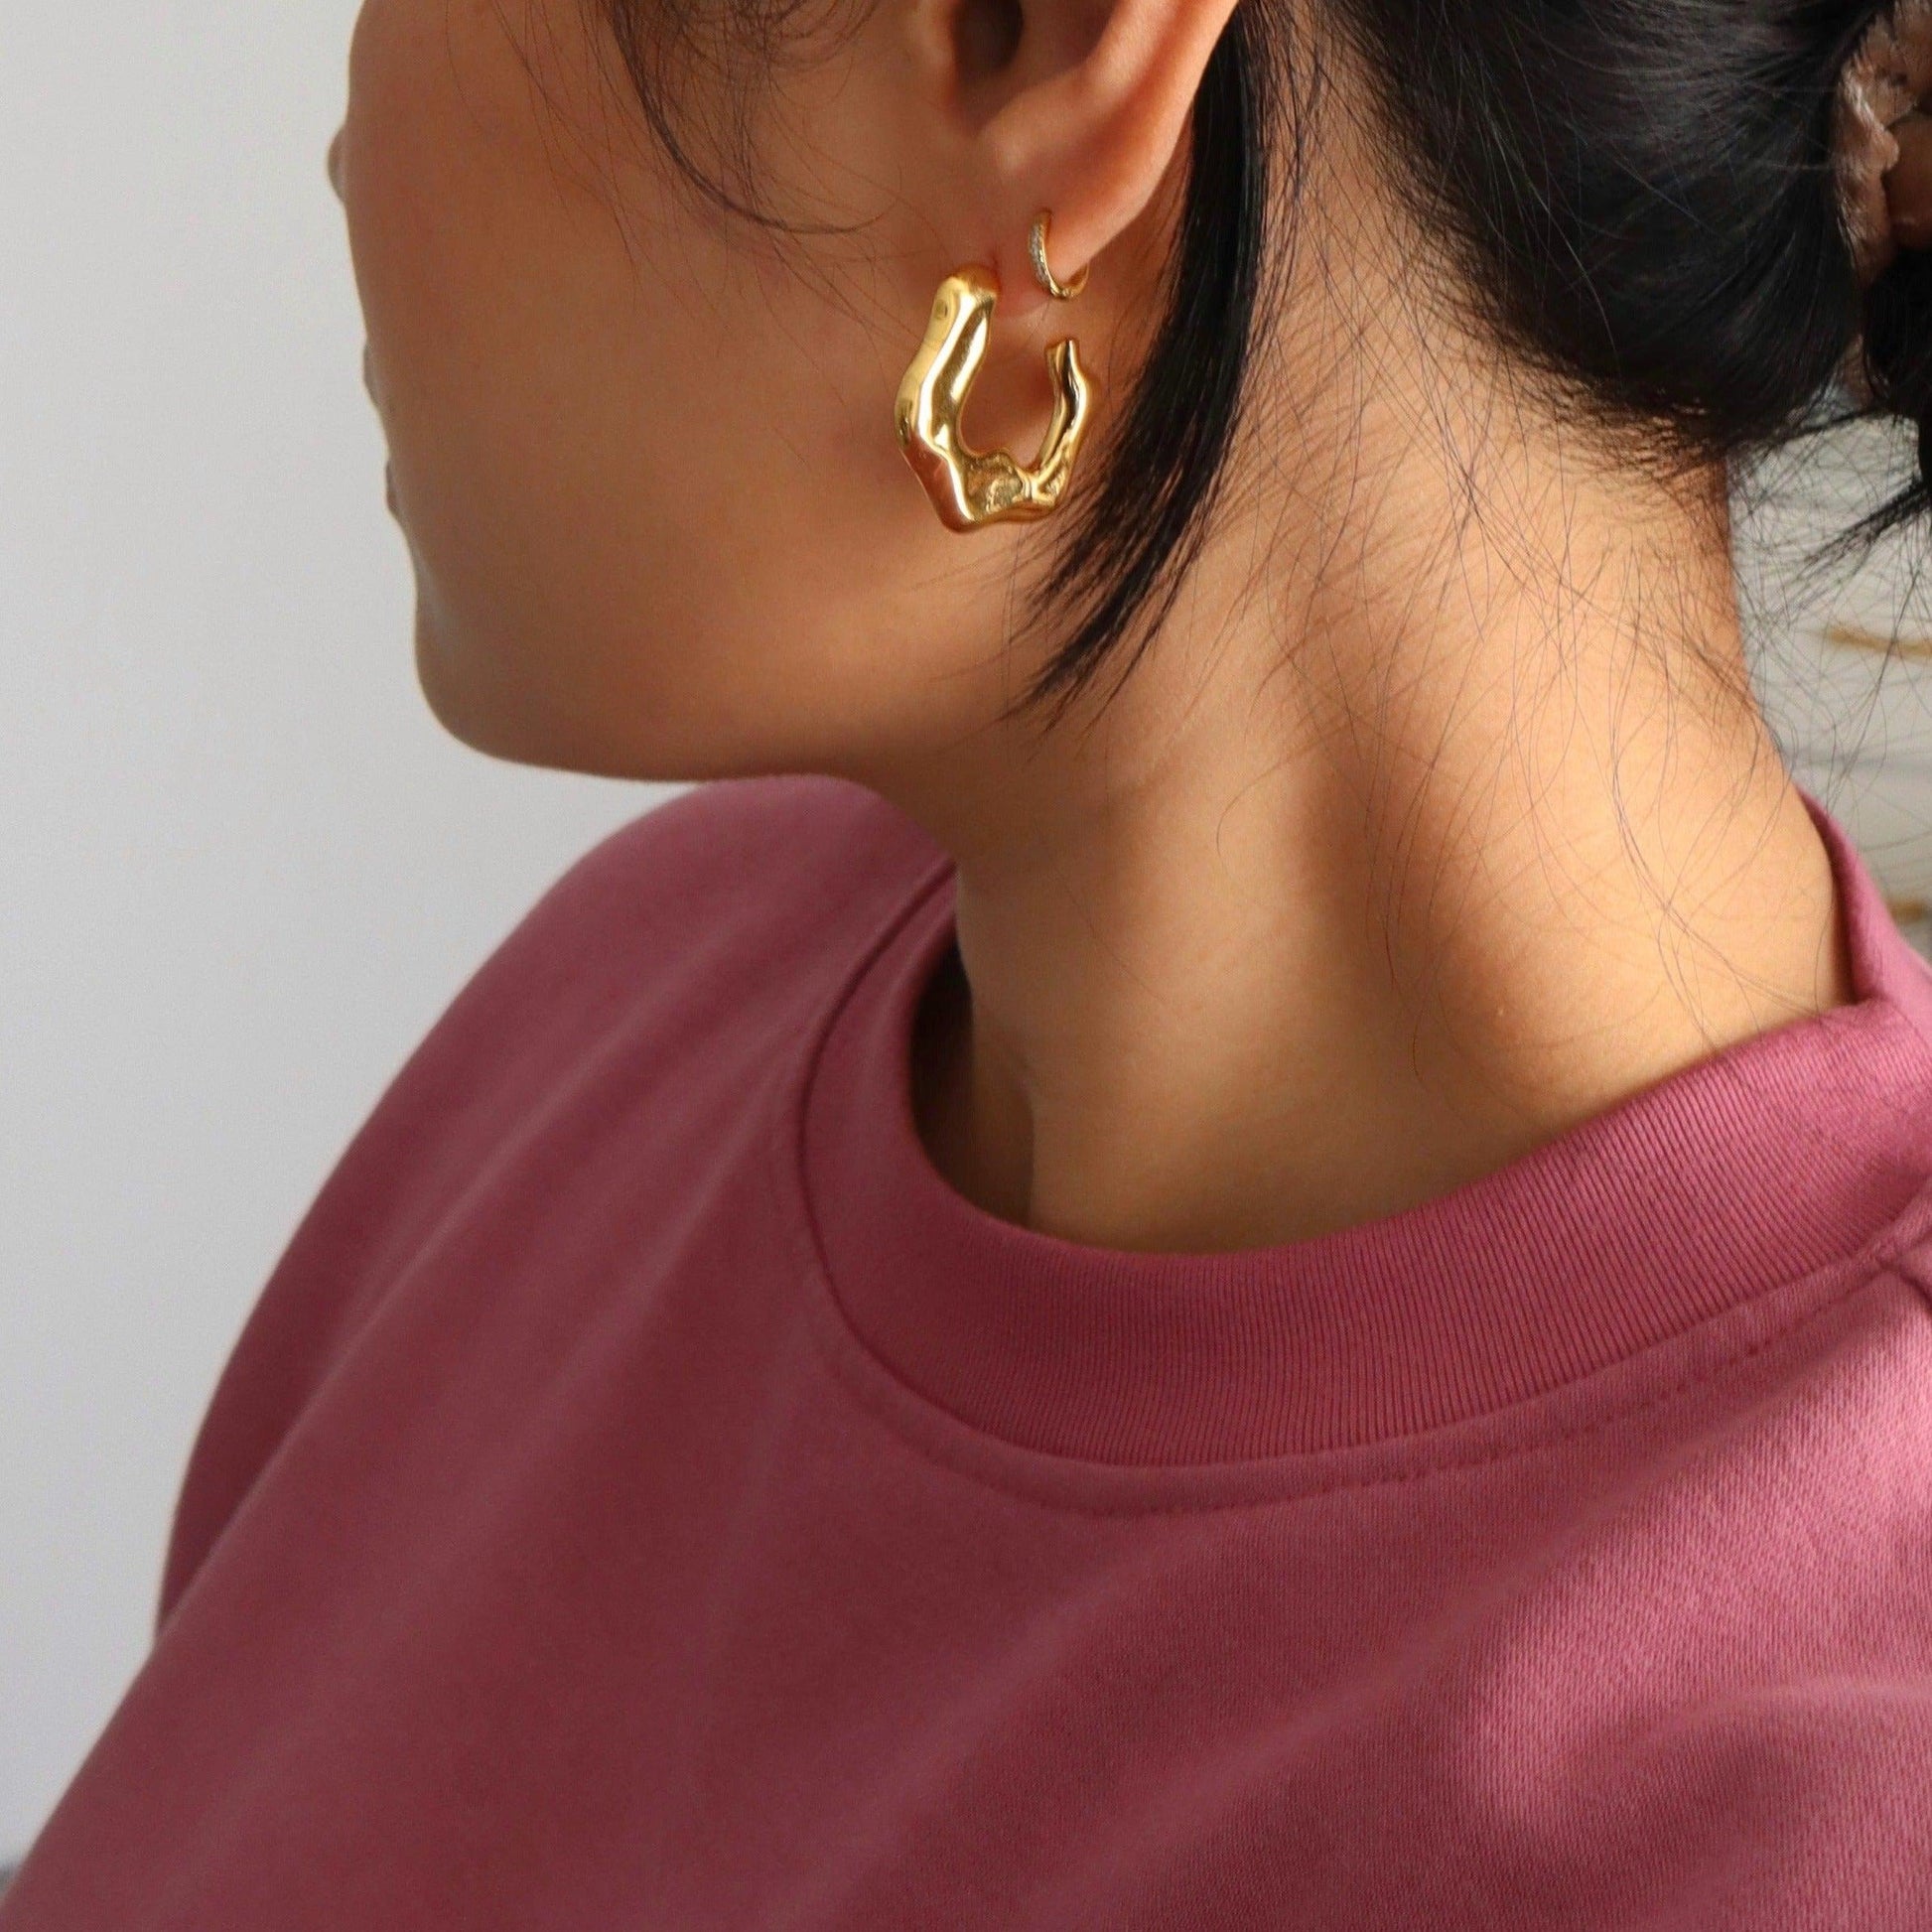 River Hoops | Statement Gold Hoops - JESSA JEWELRY | GOLD JEWELRY; dainty, affordable gold everyday jewelry. Tarnish free, water-resistant, hypoallergenic. Jewelry for everyday wear